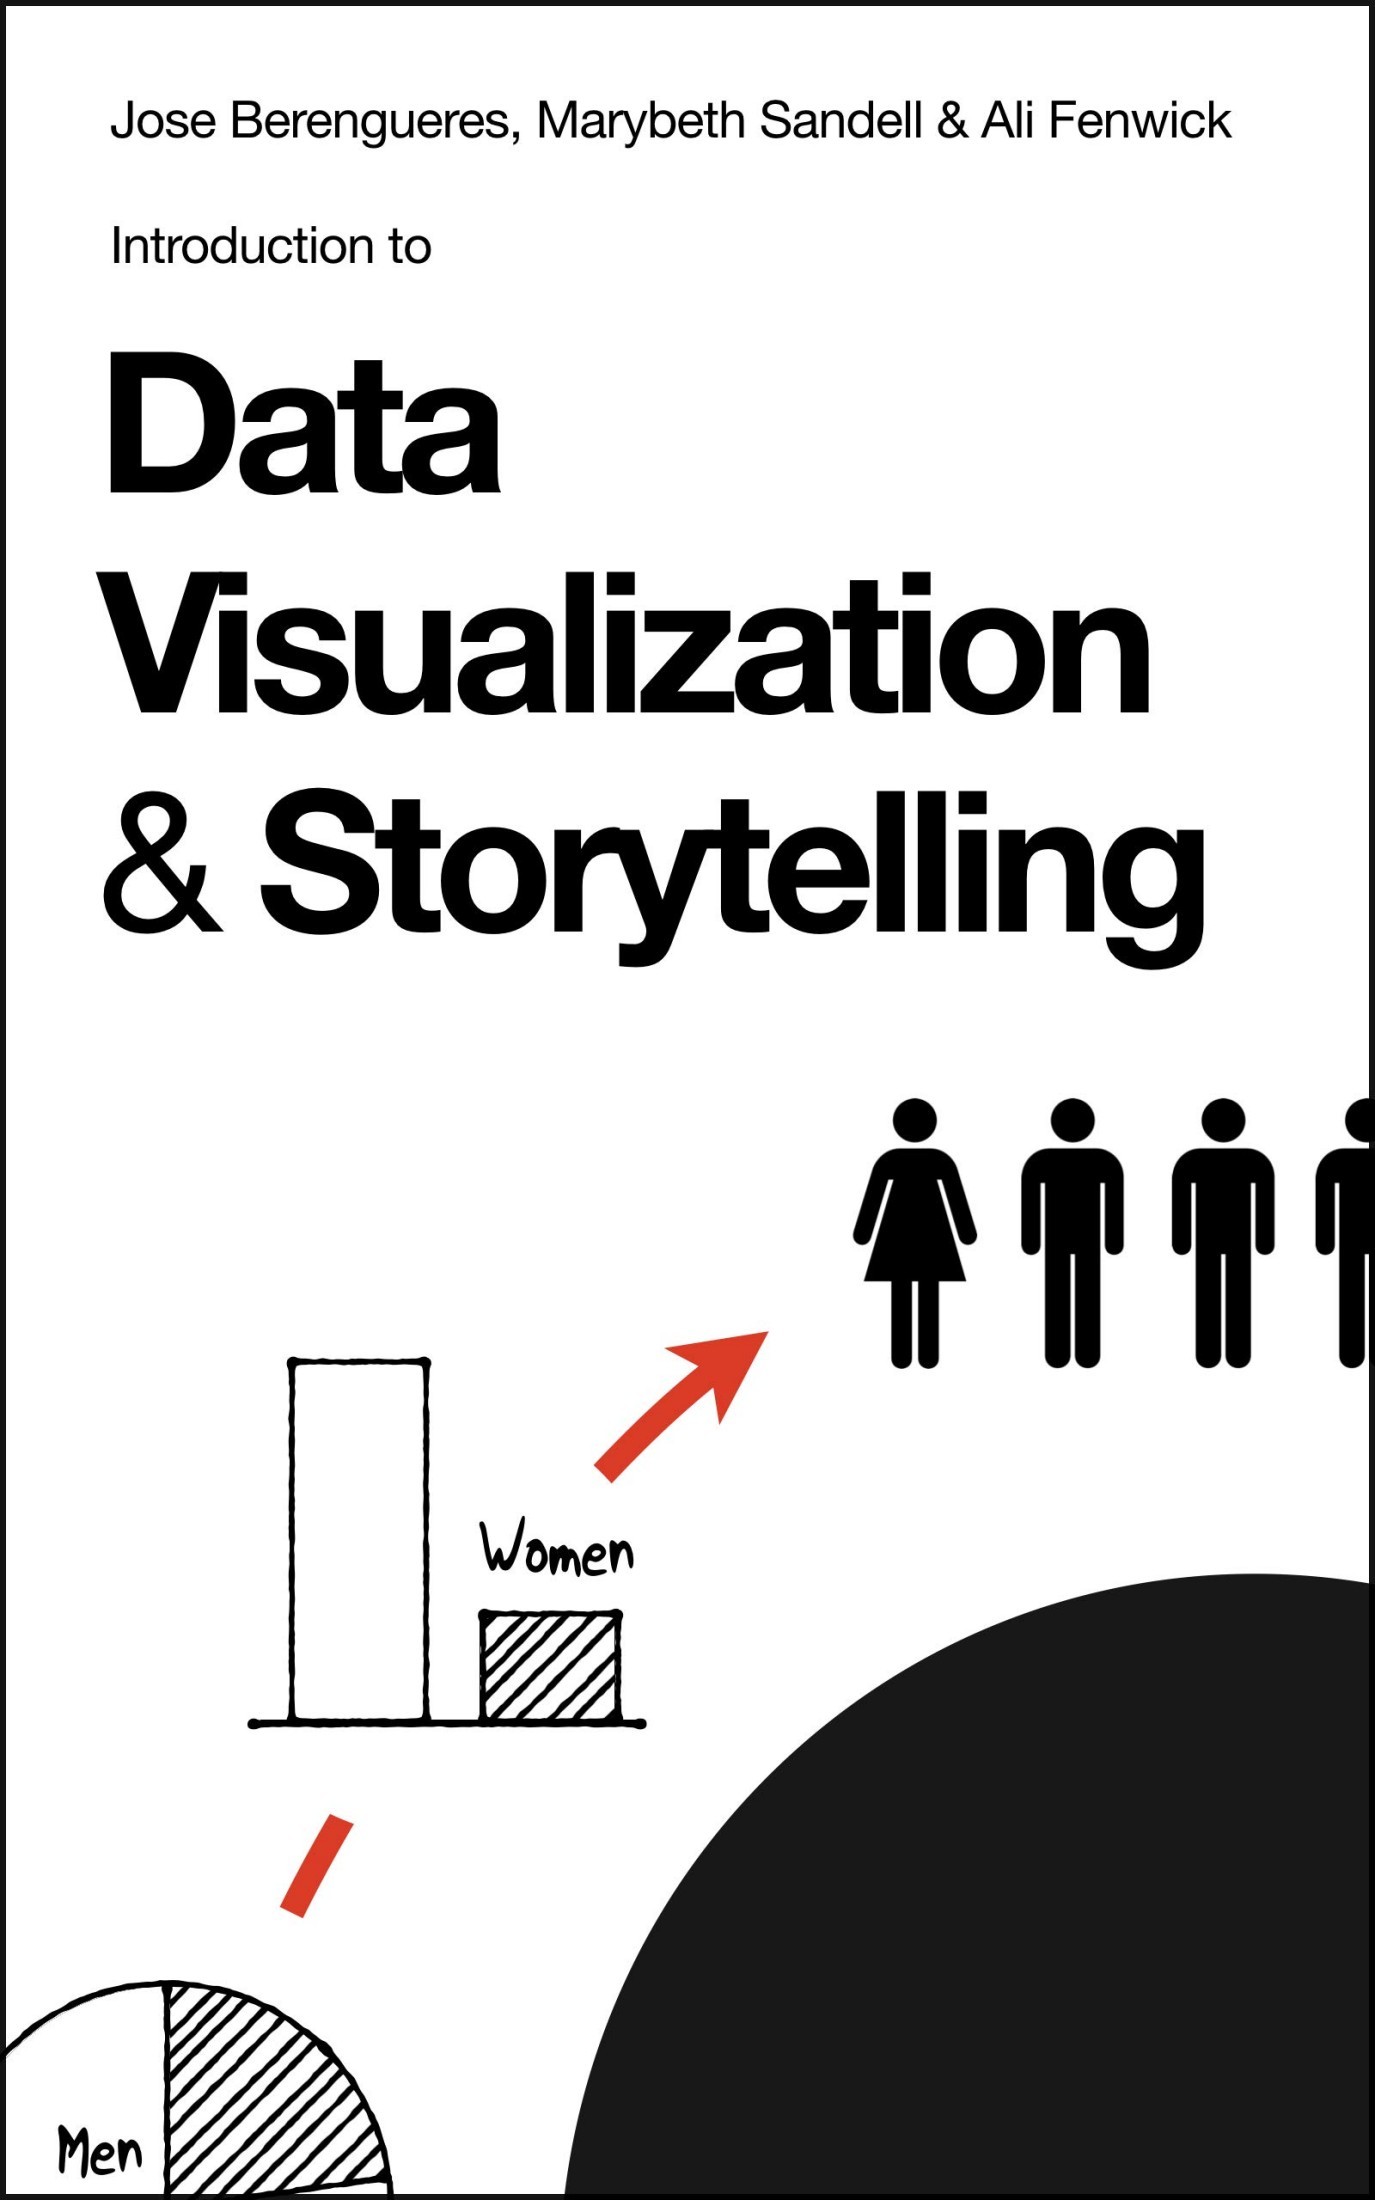 Introduction to Data Visualization and Storytelling: A Guide for the Data Scientist